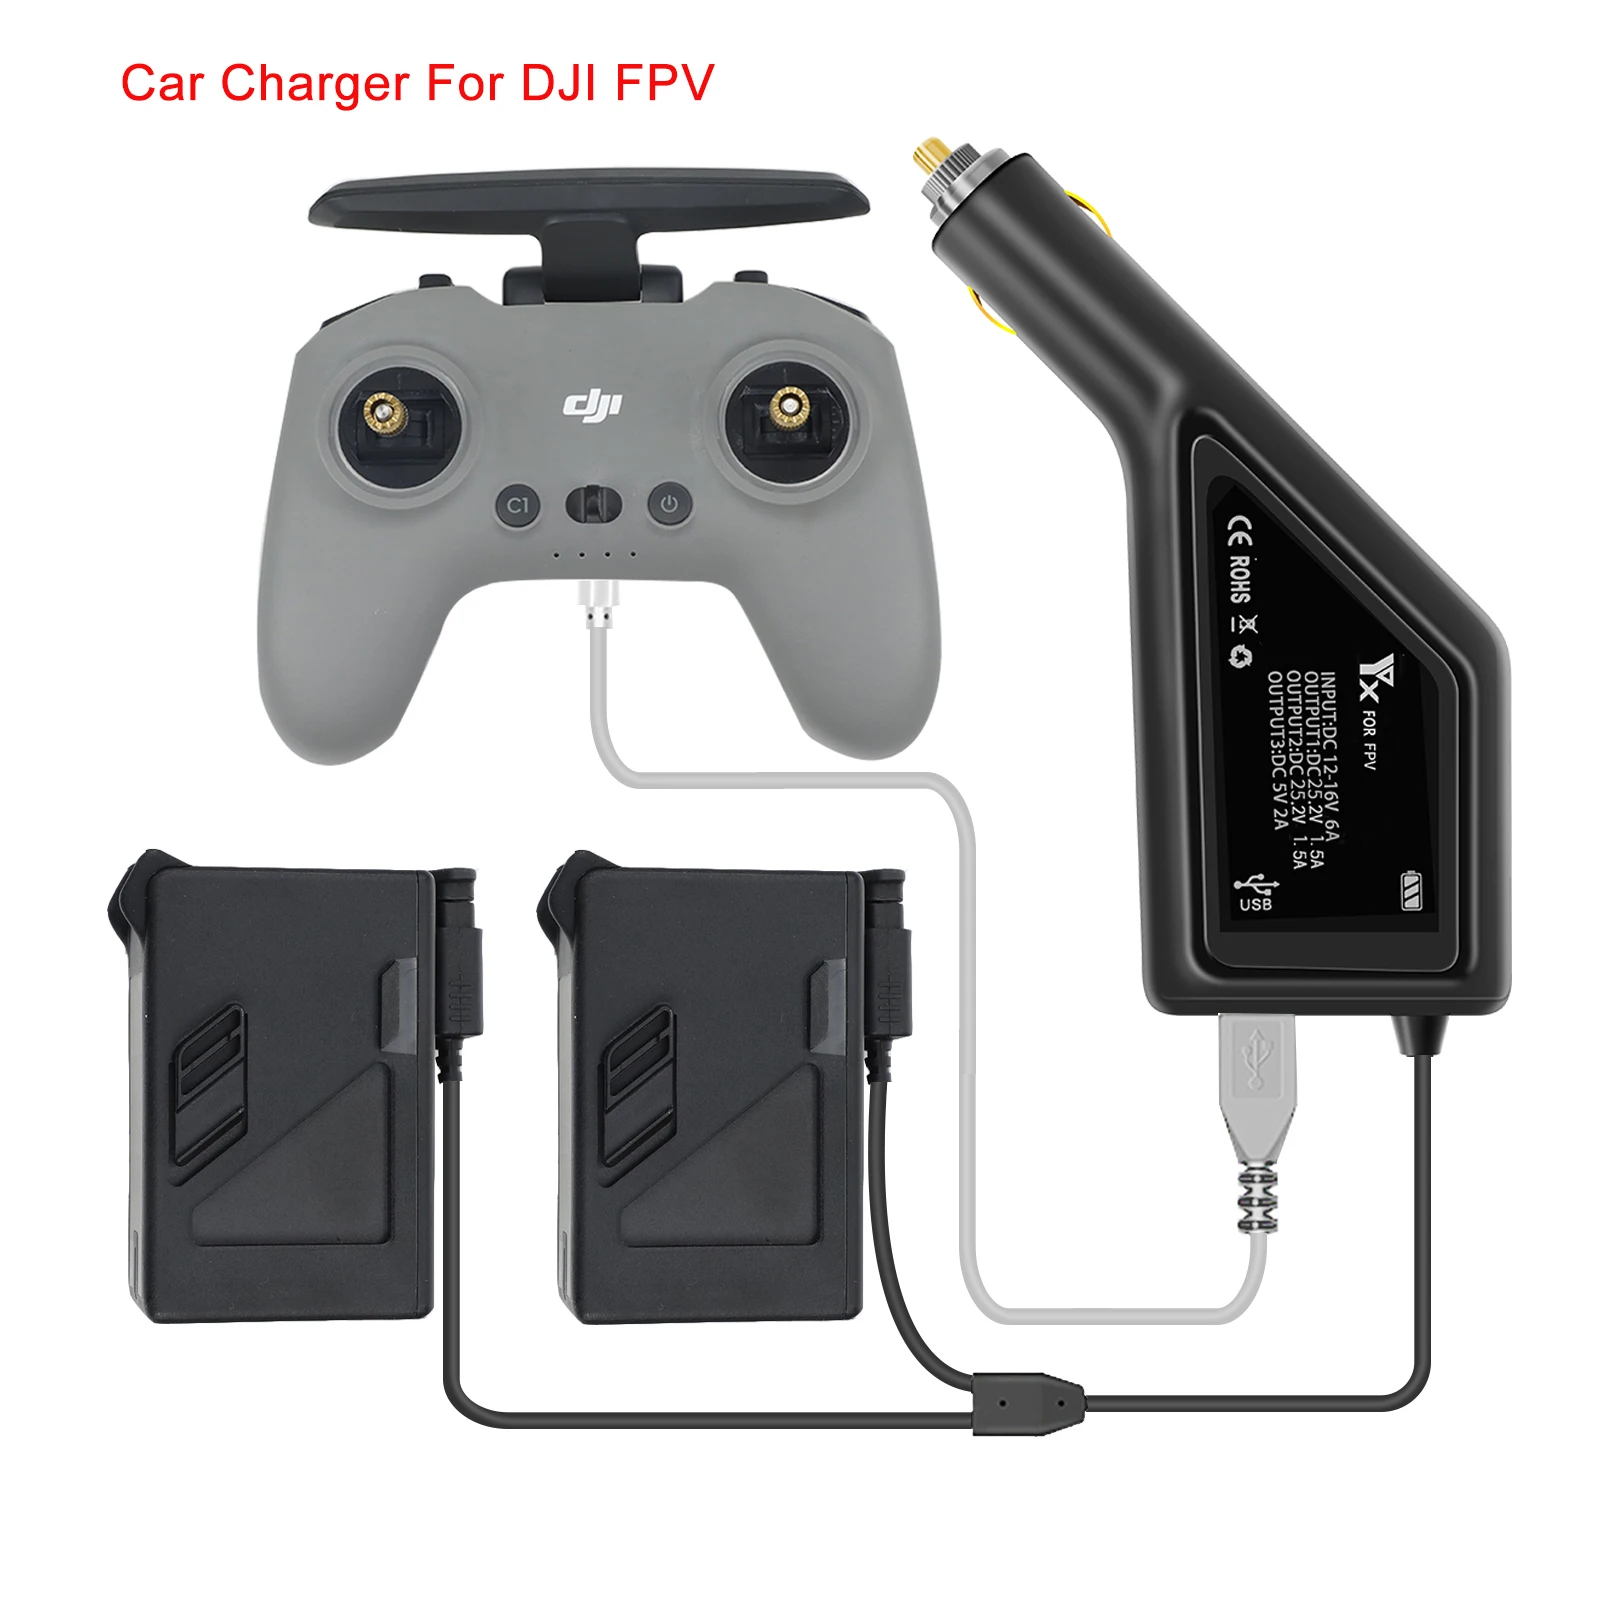 DJI FPV Car Charger Intelligent Battery Charging Hub FPV Car Connector USB Adapter Multi 3 In 1 Car Charger For DJI FPV